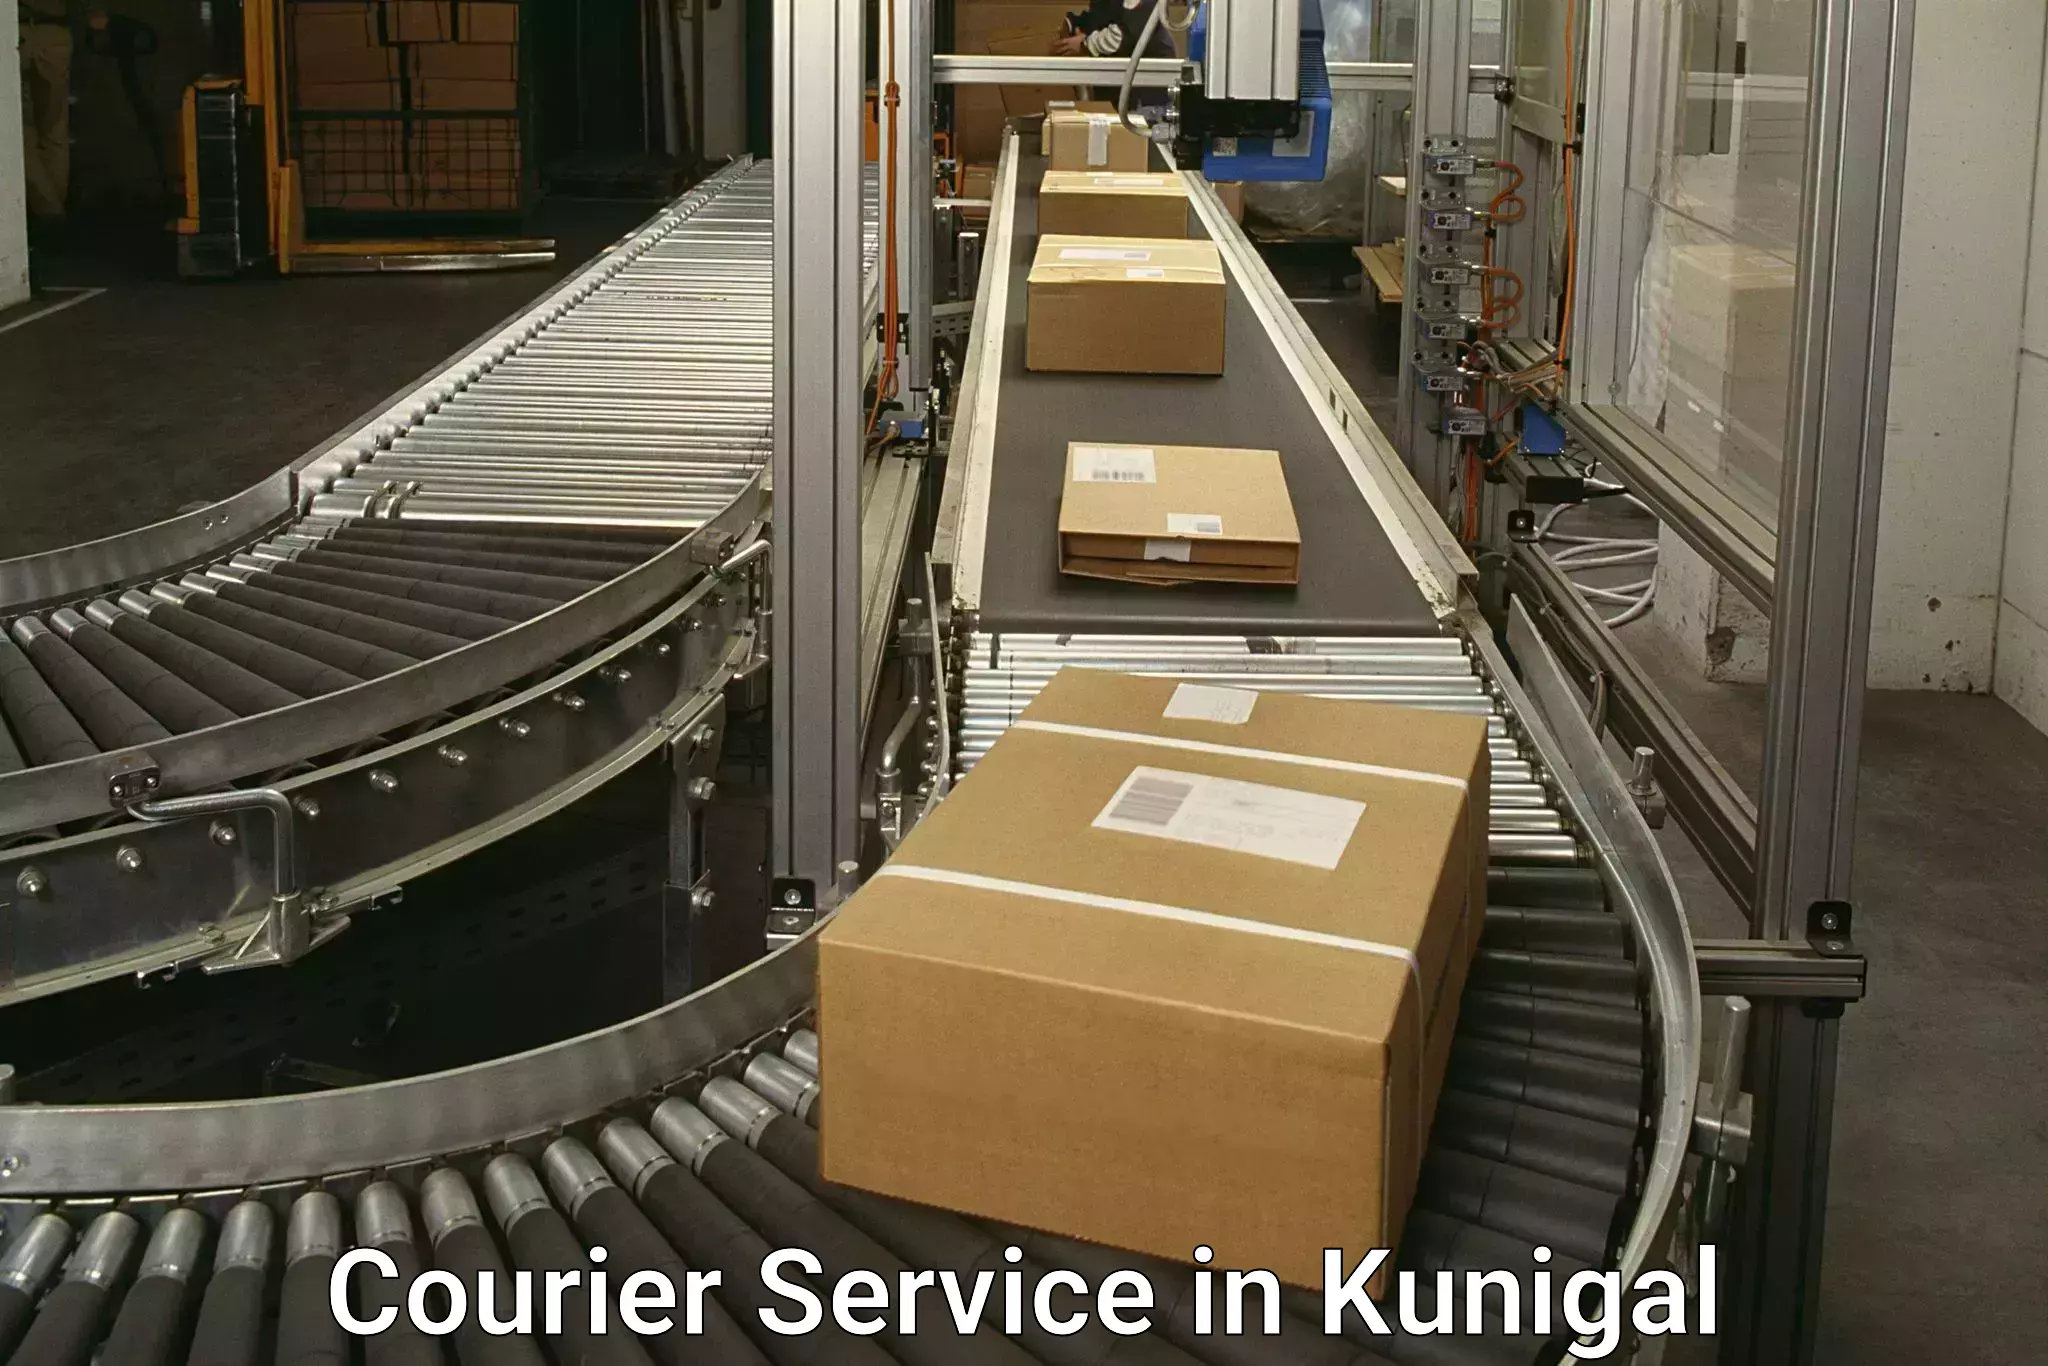 Postal and courier services in Kunigal